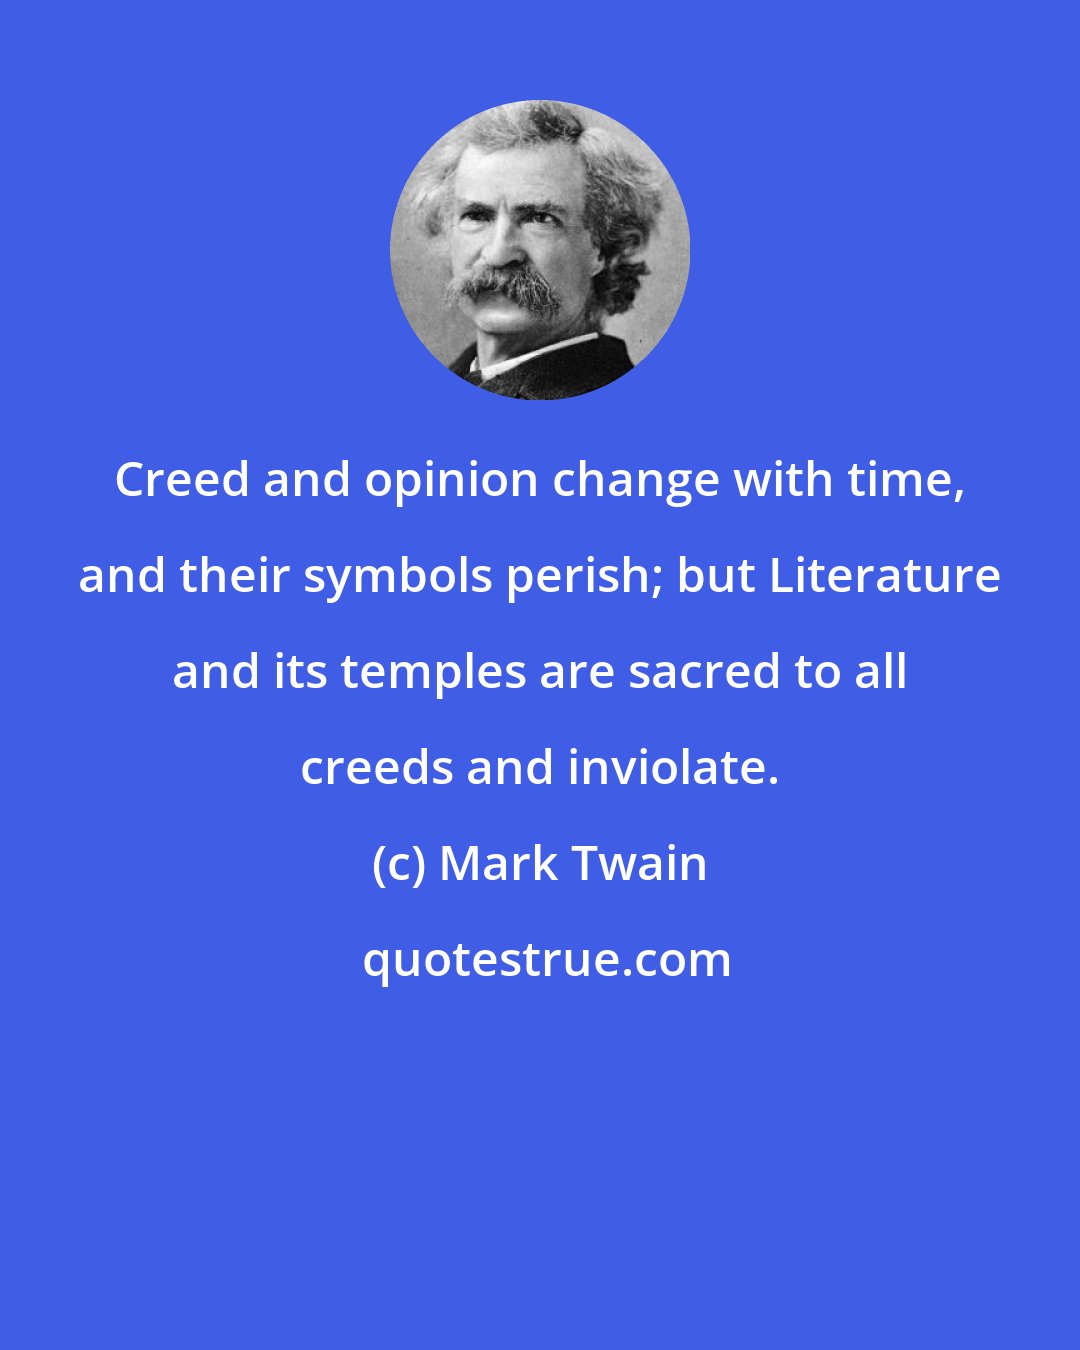 Mark Twain: Creed and opinion change with time, and their symbols perish; but Literature and its temples are sacred to all creeds and inviolate.